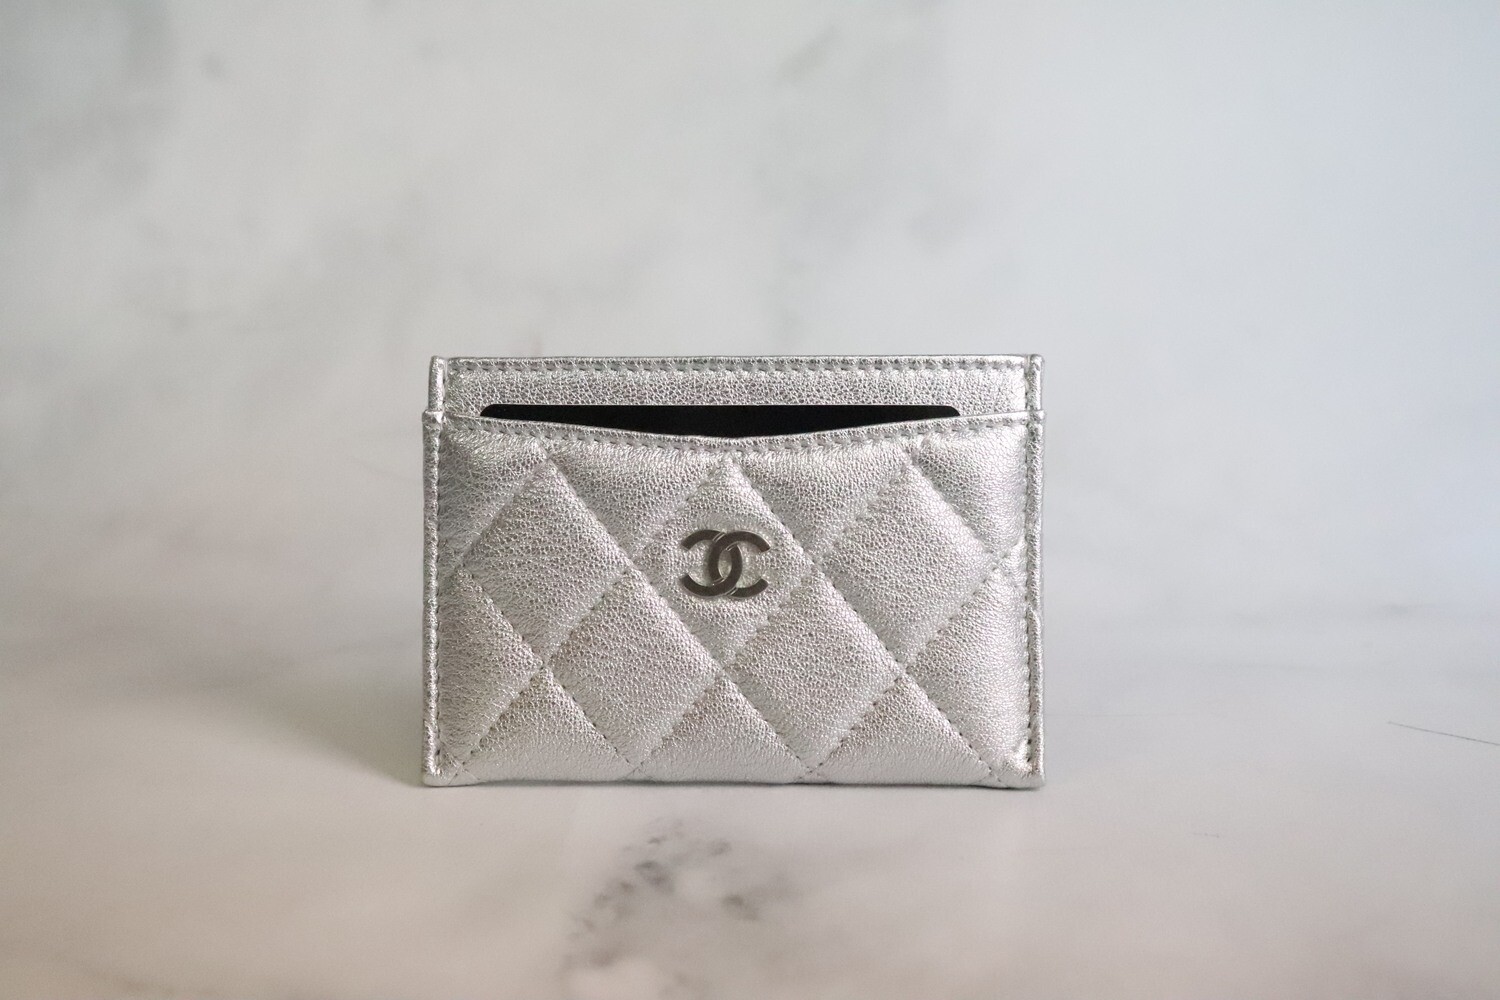 Chanel SLG Silver Cardholder, Silver Hardware, New in Box